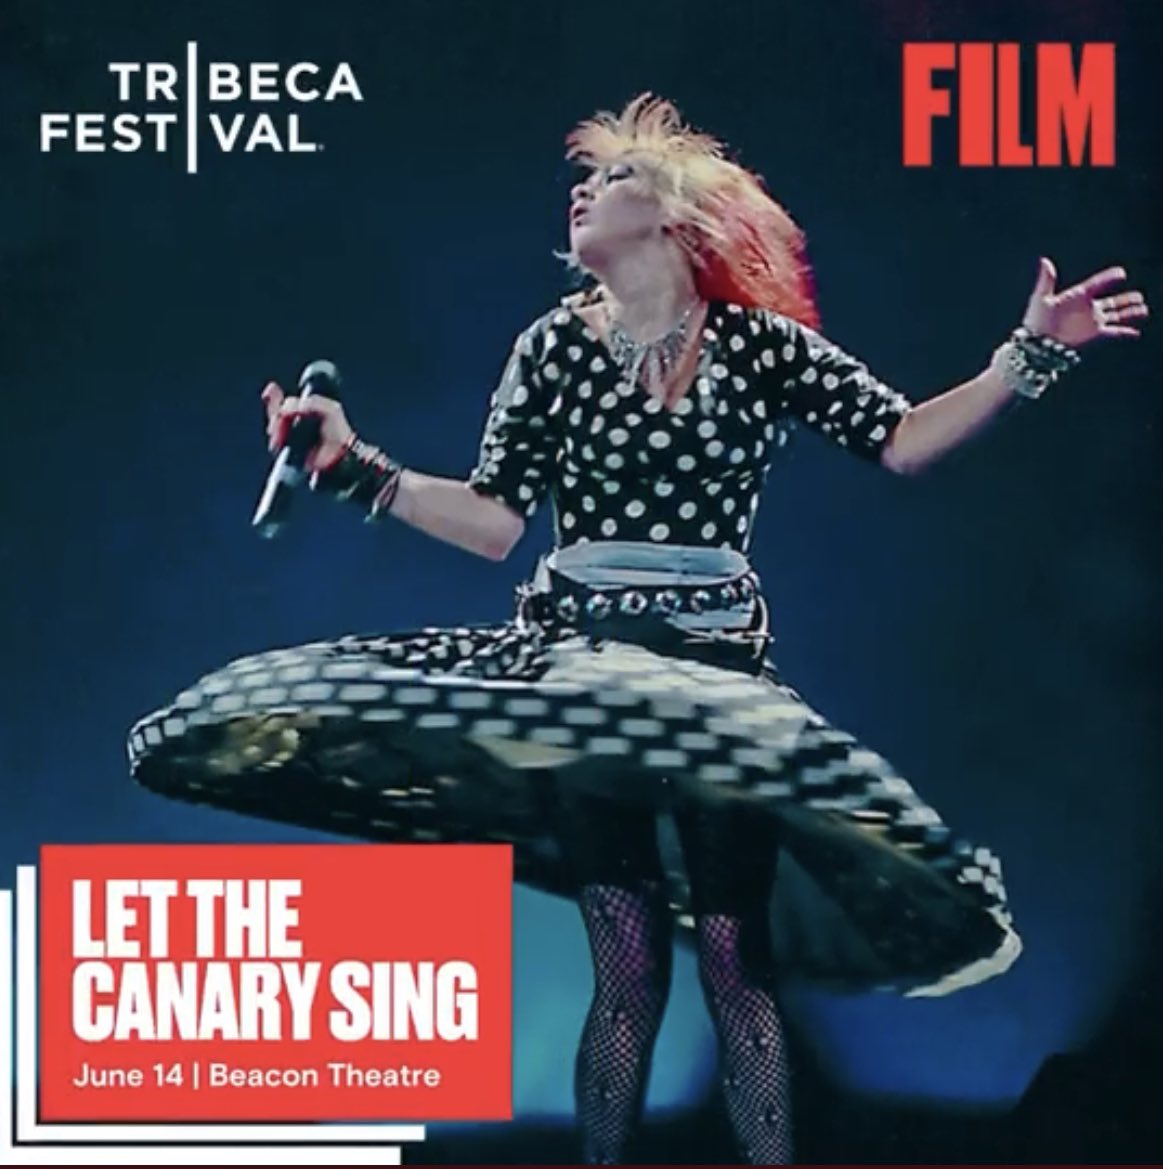 Incredibly excited to announce that our #CyndiLauper film Let The Canary Sing will have its World Premiere at @Tribeca A huge thank you to the wonderful team who made it all possible- Alison Ellwood @trevorbirney @EimhearONeill @AG_Tully @sonymusicnews @NIScreen @ConcordRecords